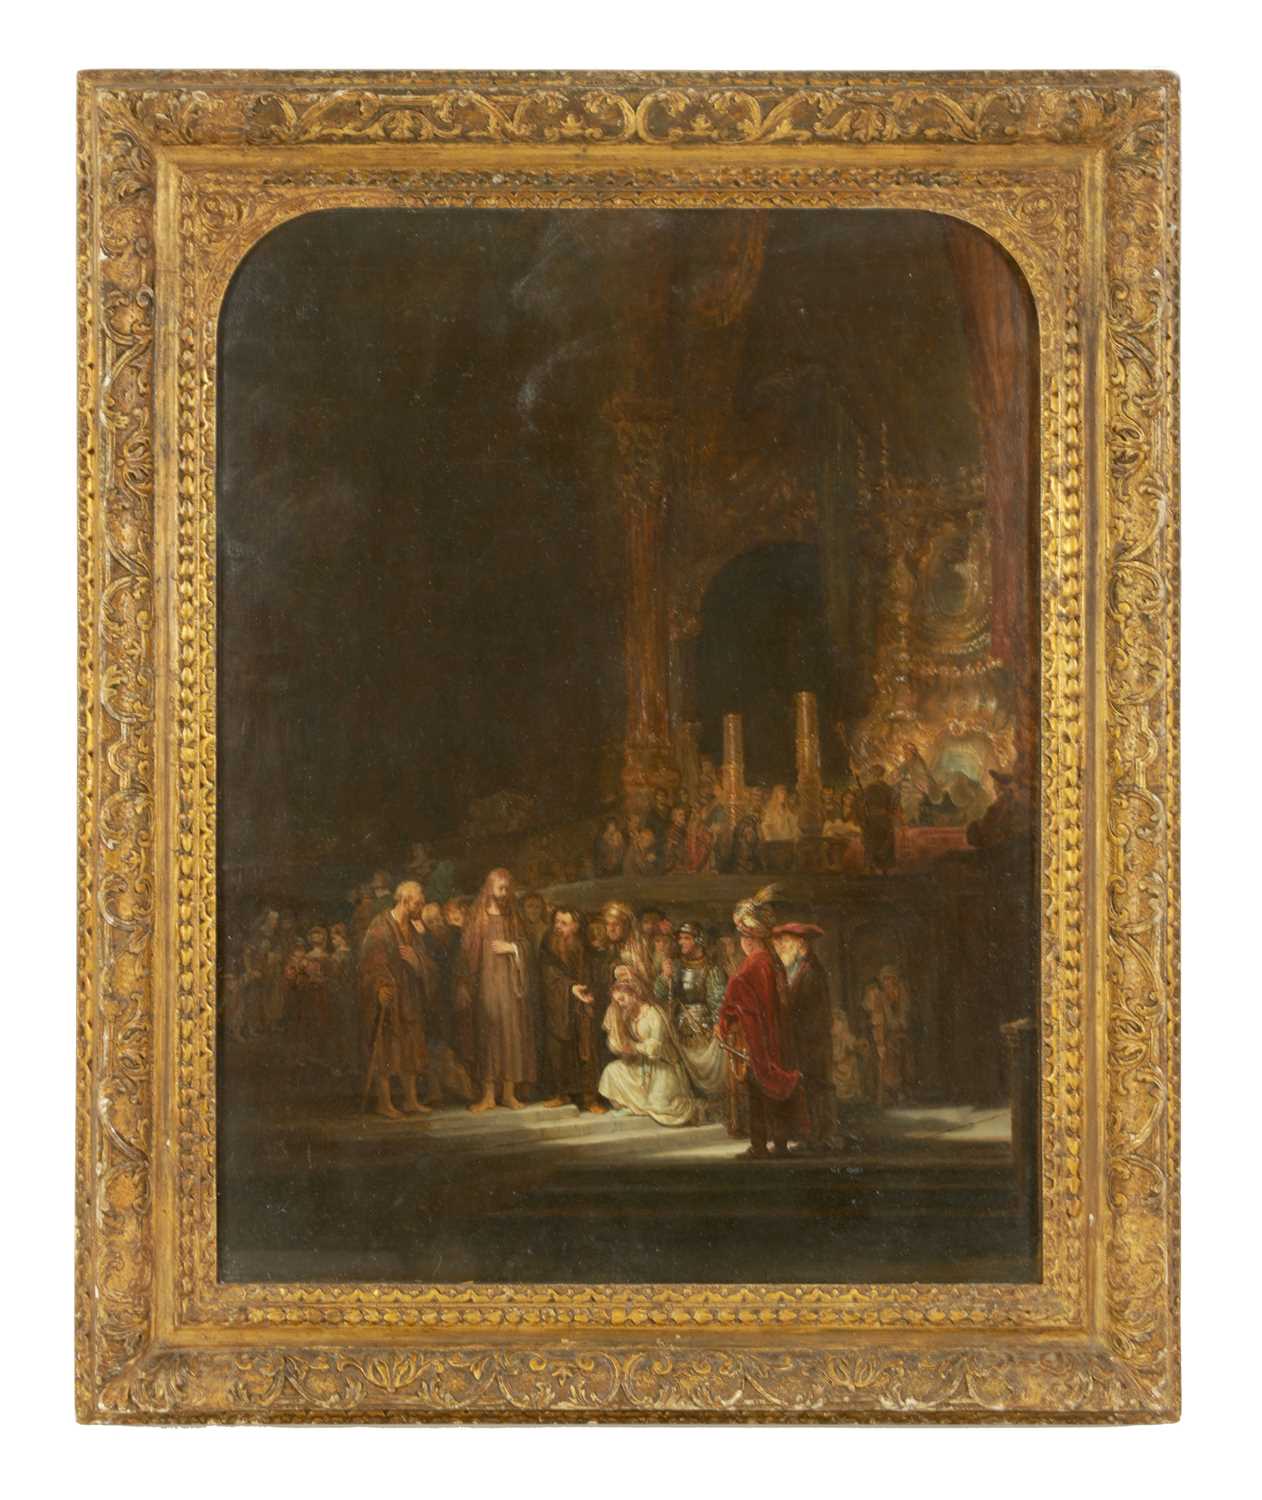 Lot 646 - FOLLOWER OF REMBRANDTS THE WOMEN TAKEN IN ADULTERY’ A LATE 19TH/EARLY 20TH CENTURY OIL ON BOARD